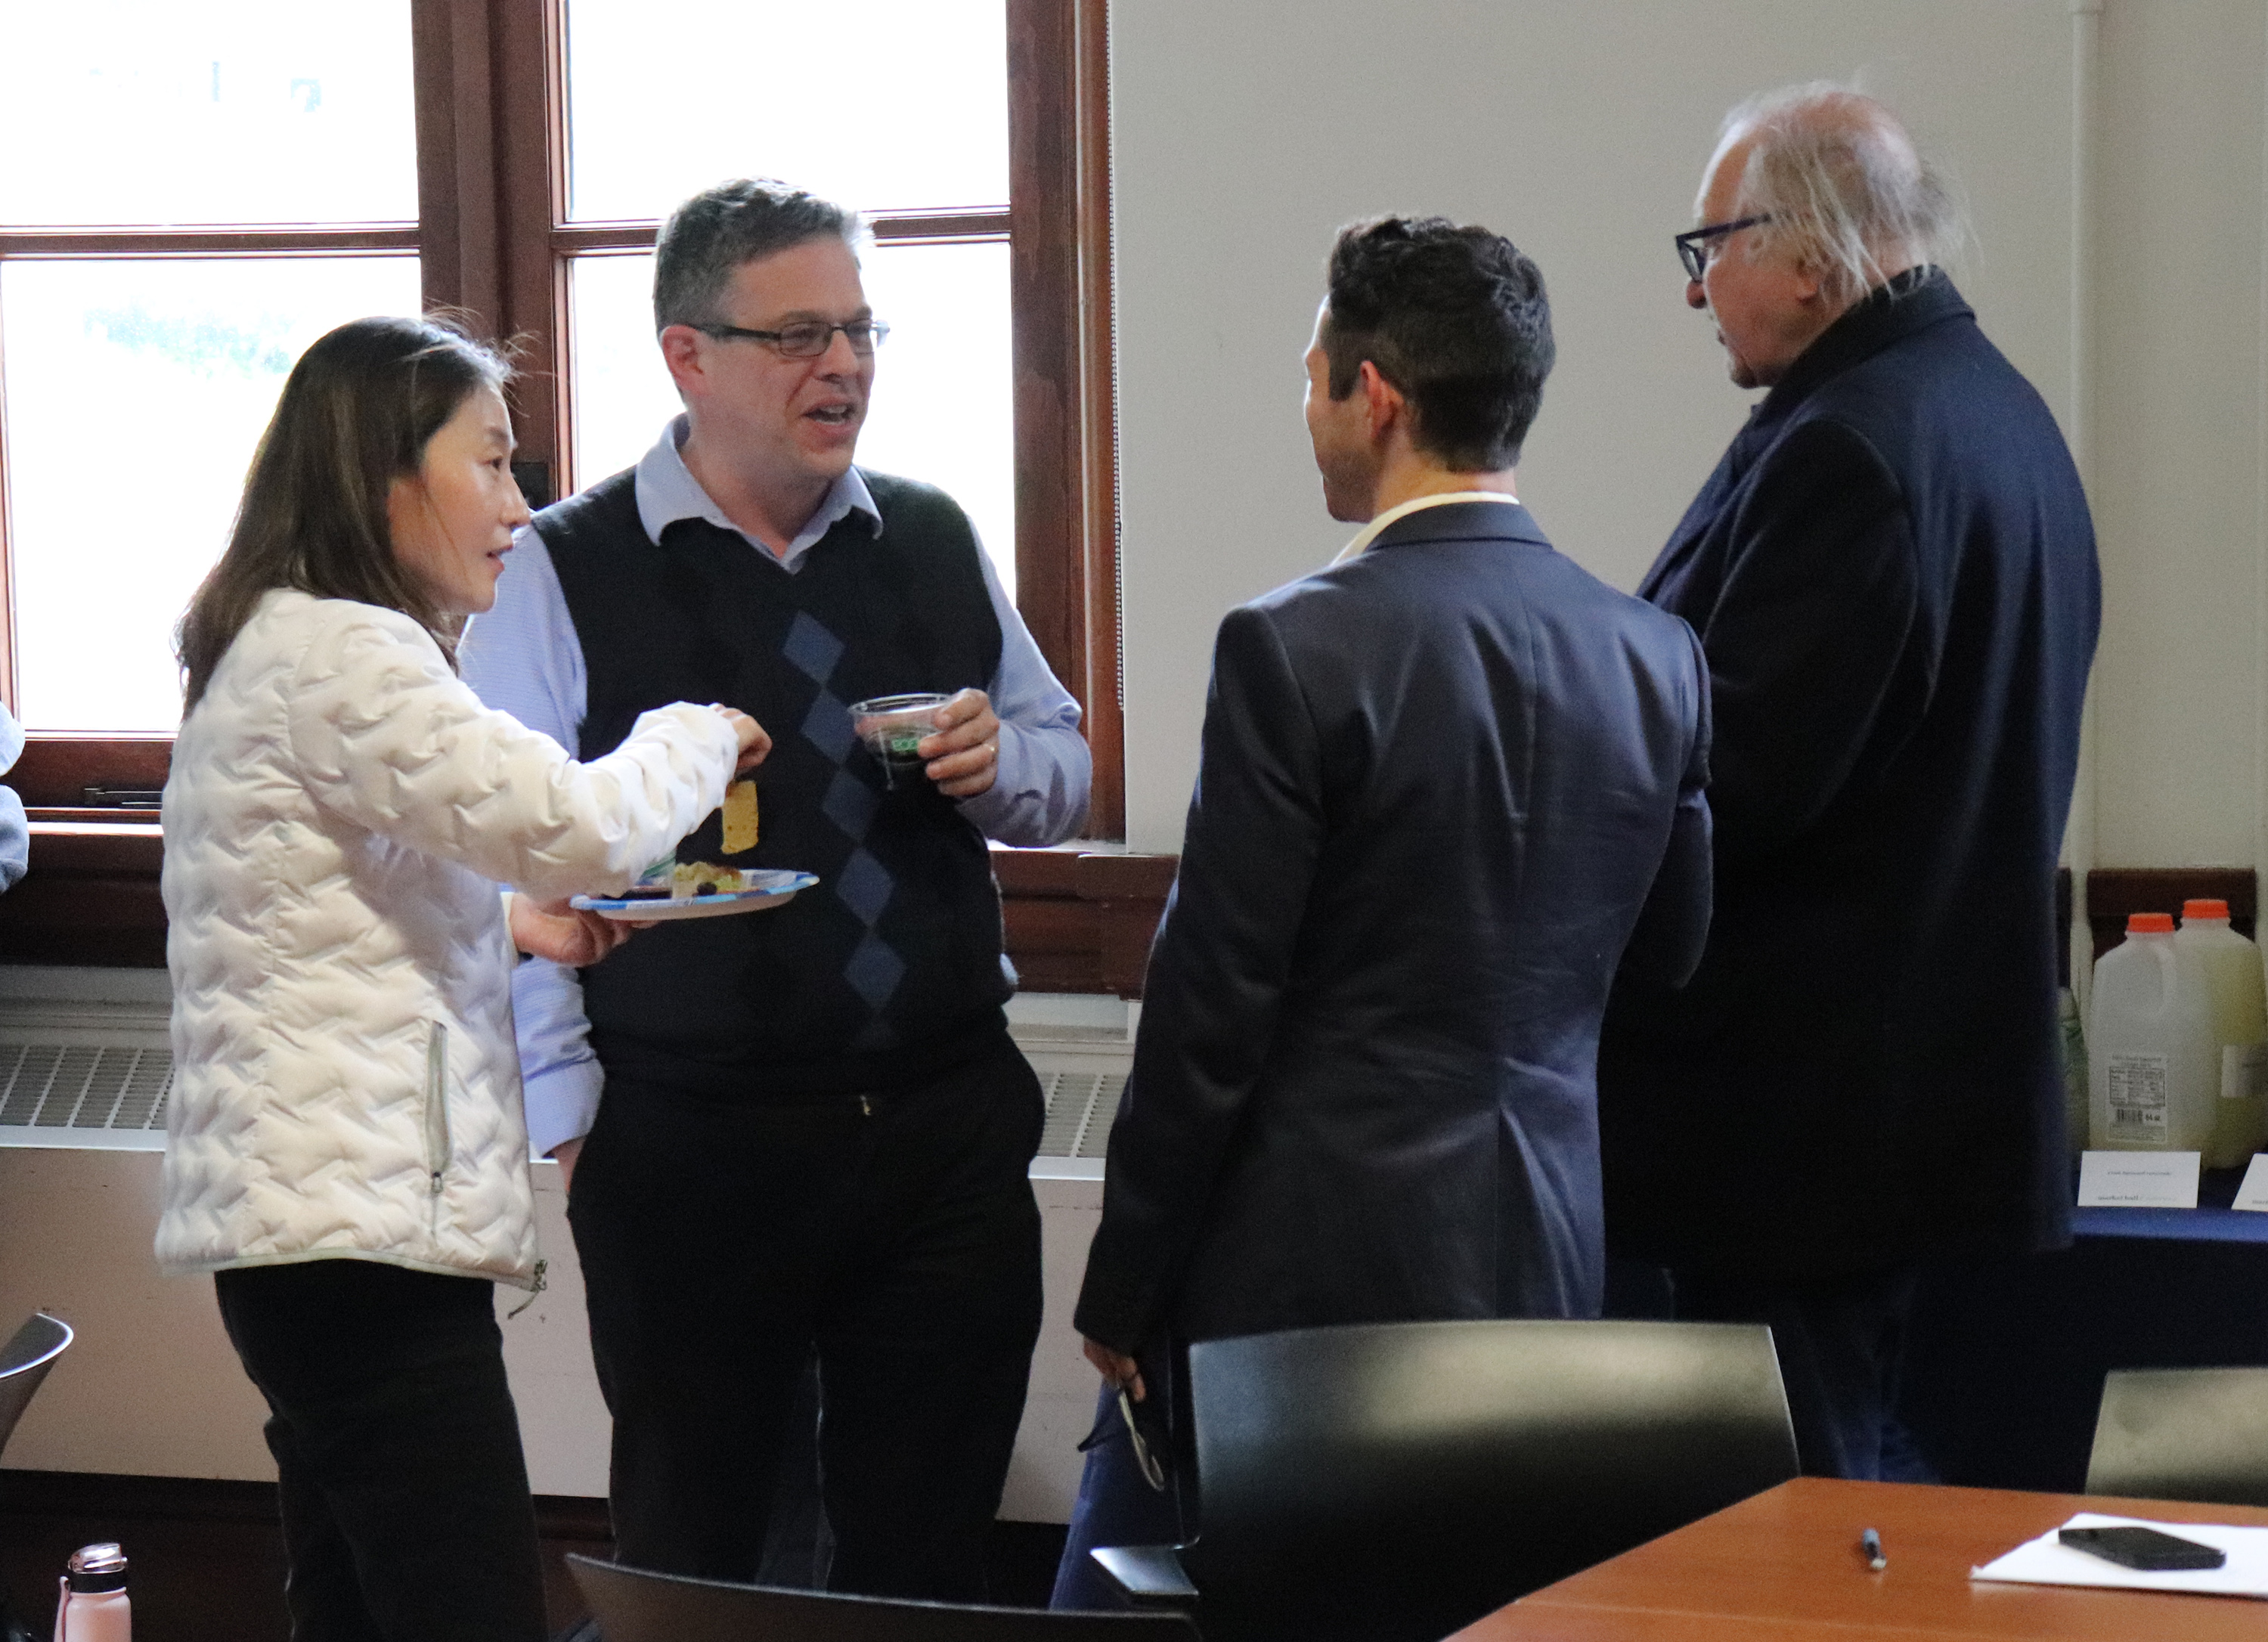 Researchers continued conversation after the roundtables